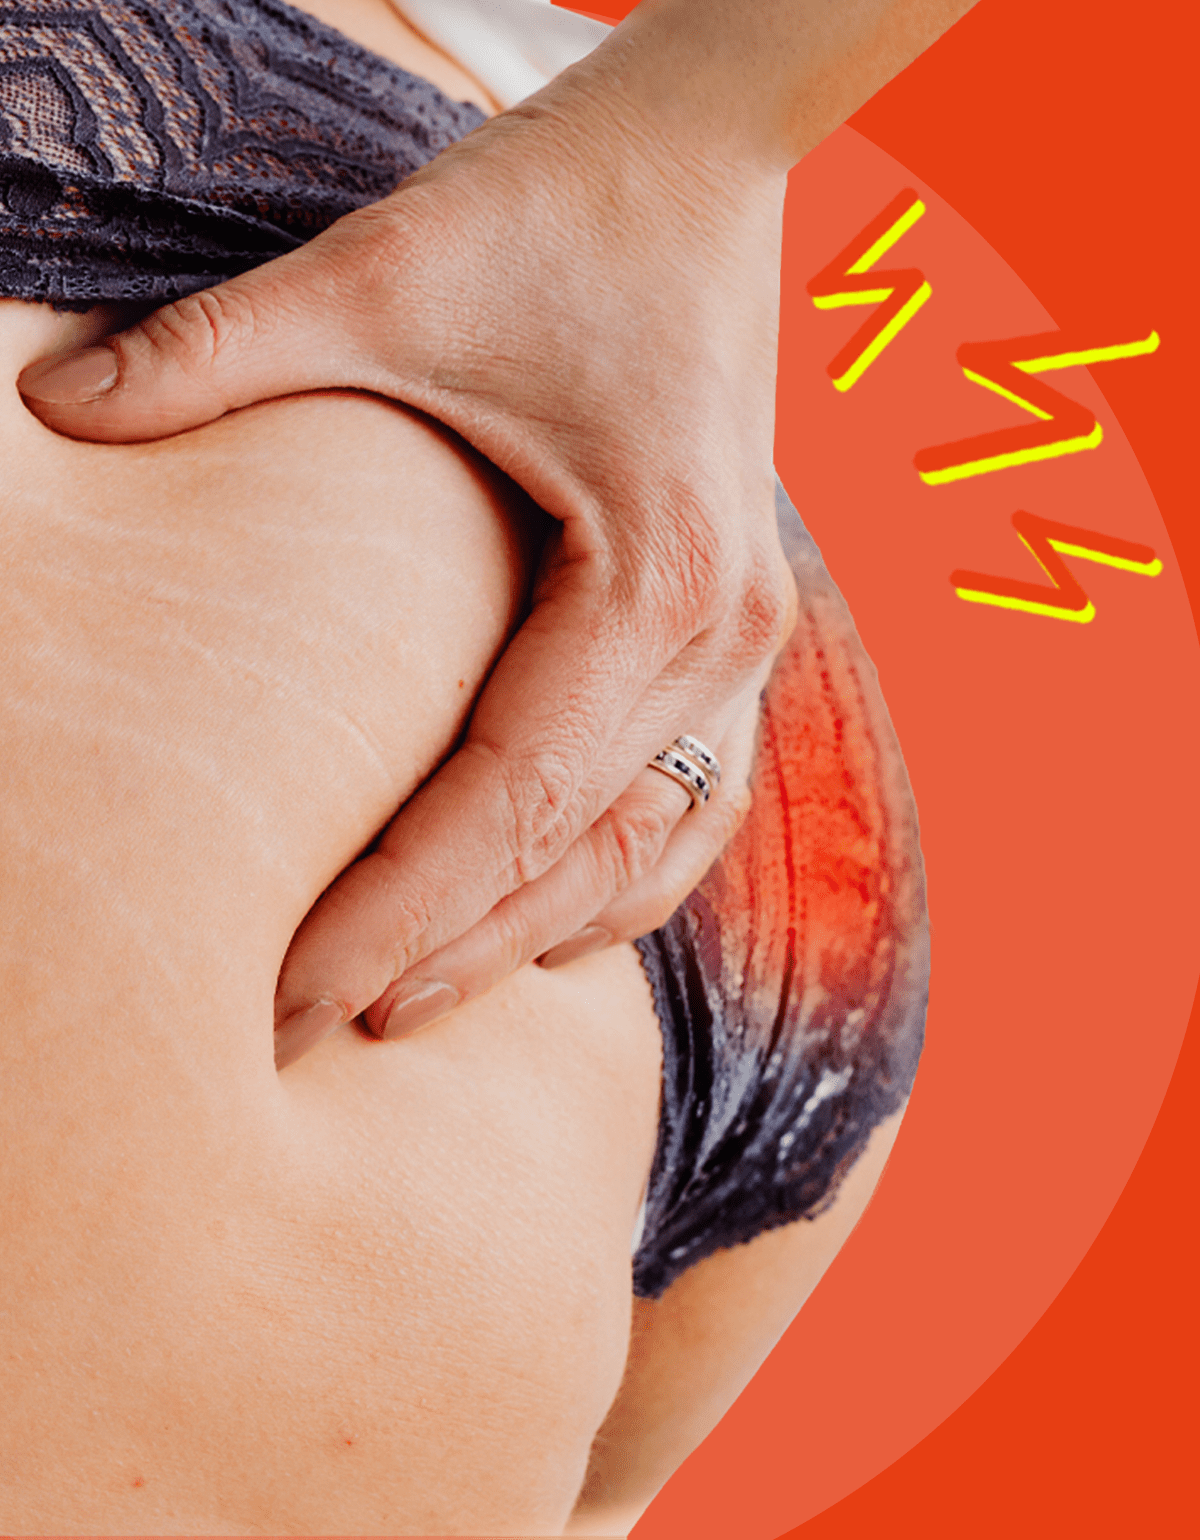 Butt cramps on your period: Yes, it’s a thing